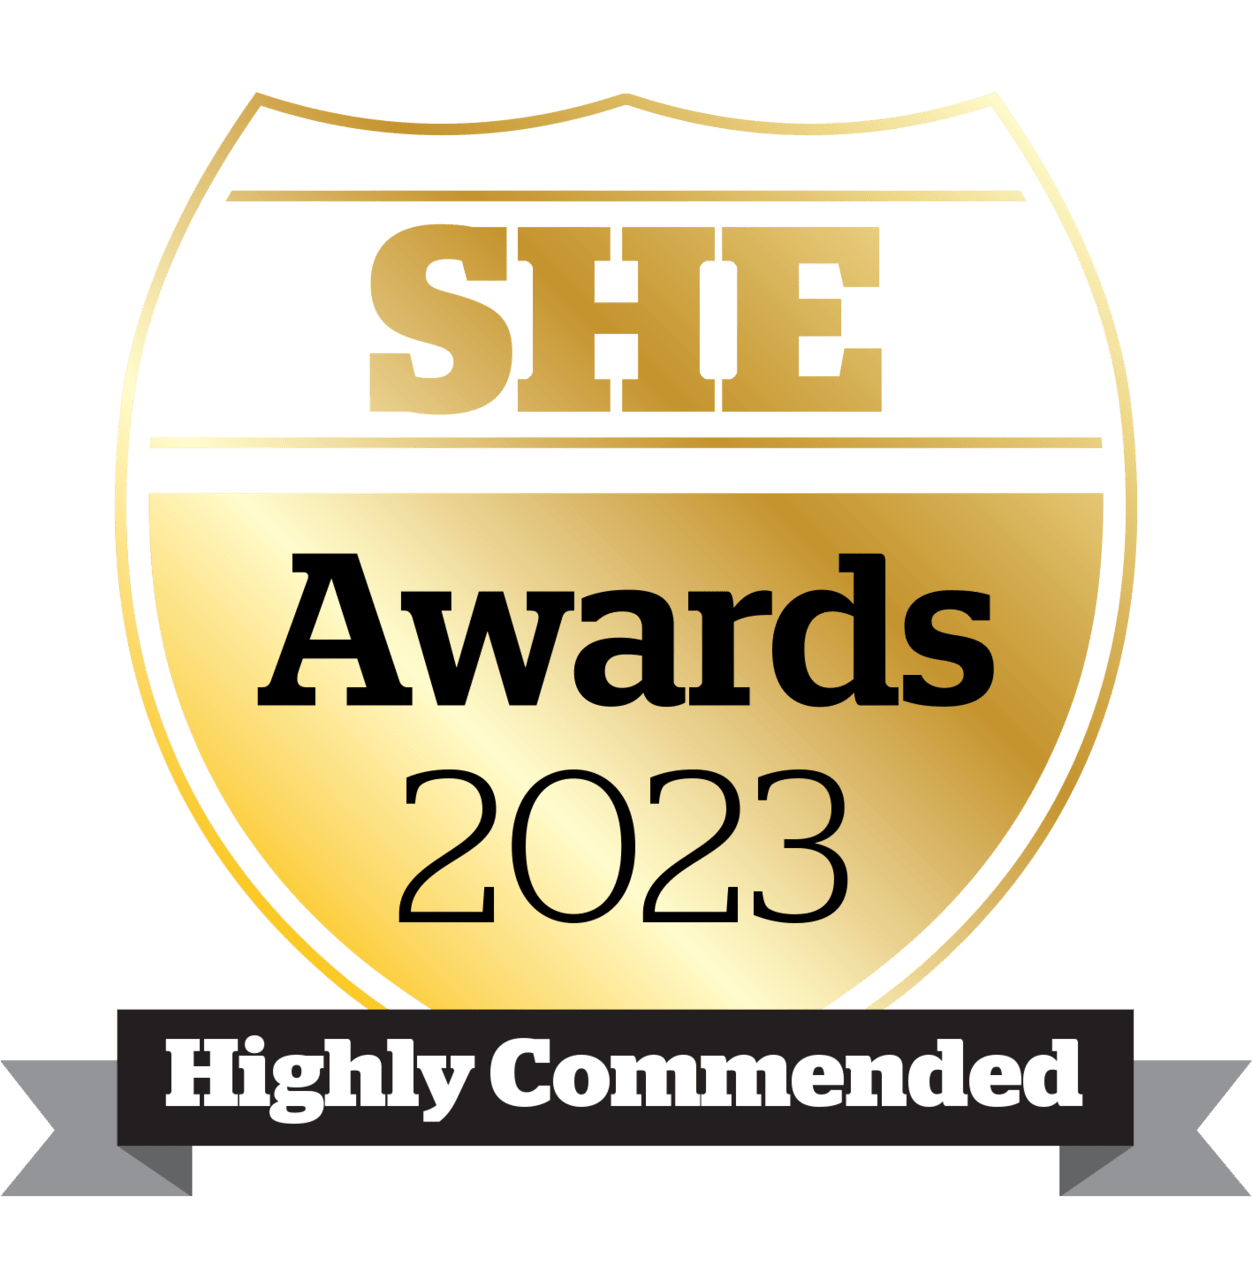 SHE Awards 2023 Highly Commended